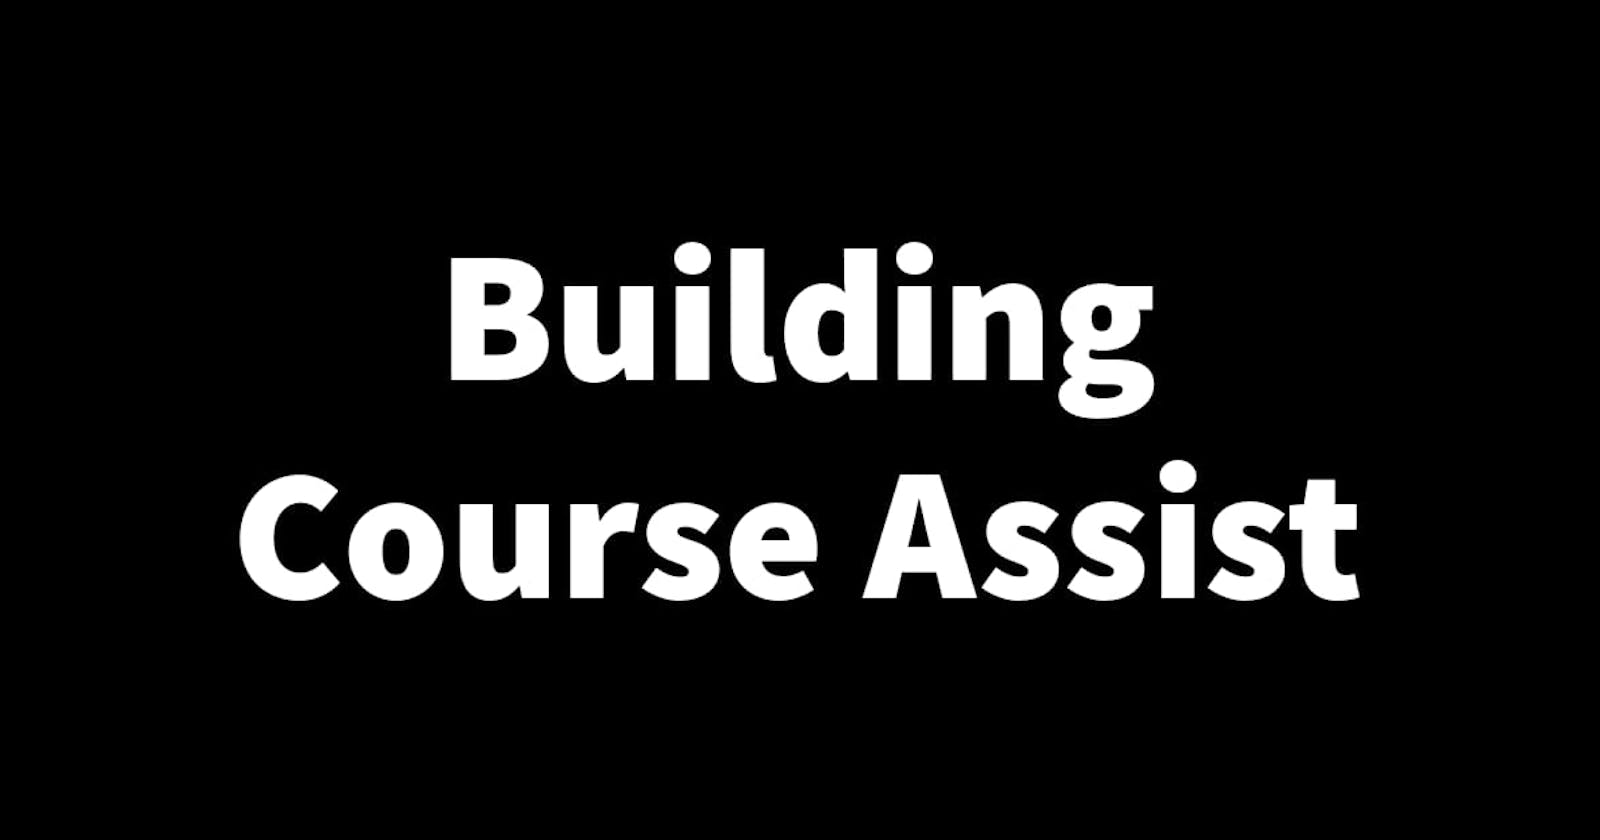 Building Course Assist Part 6: Testing the system